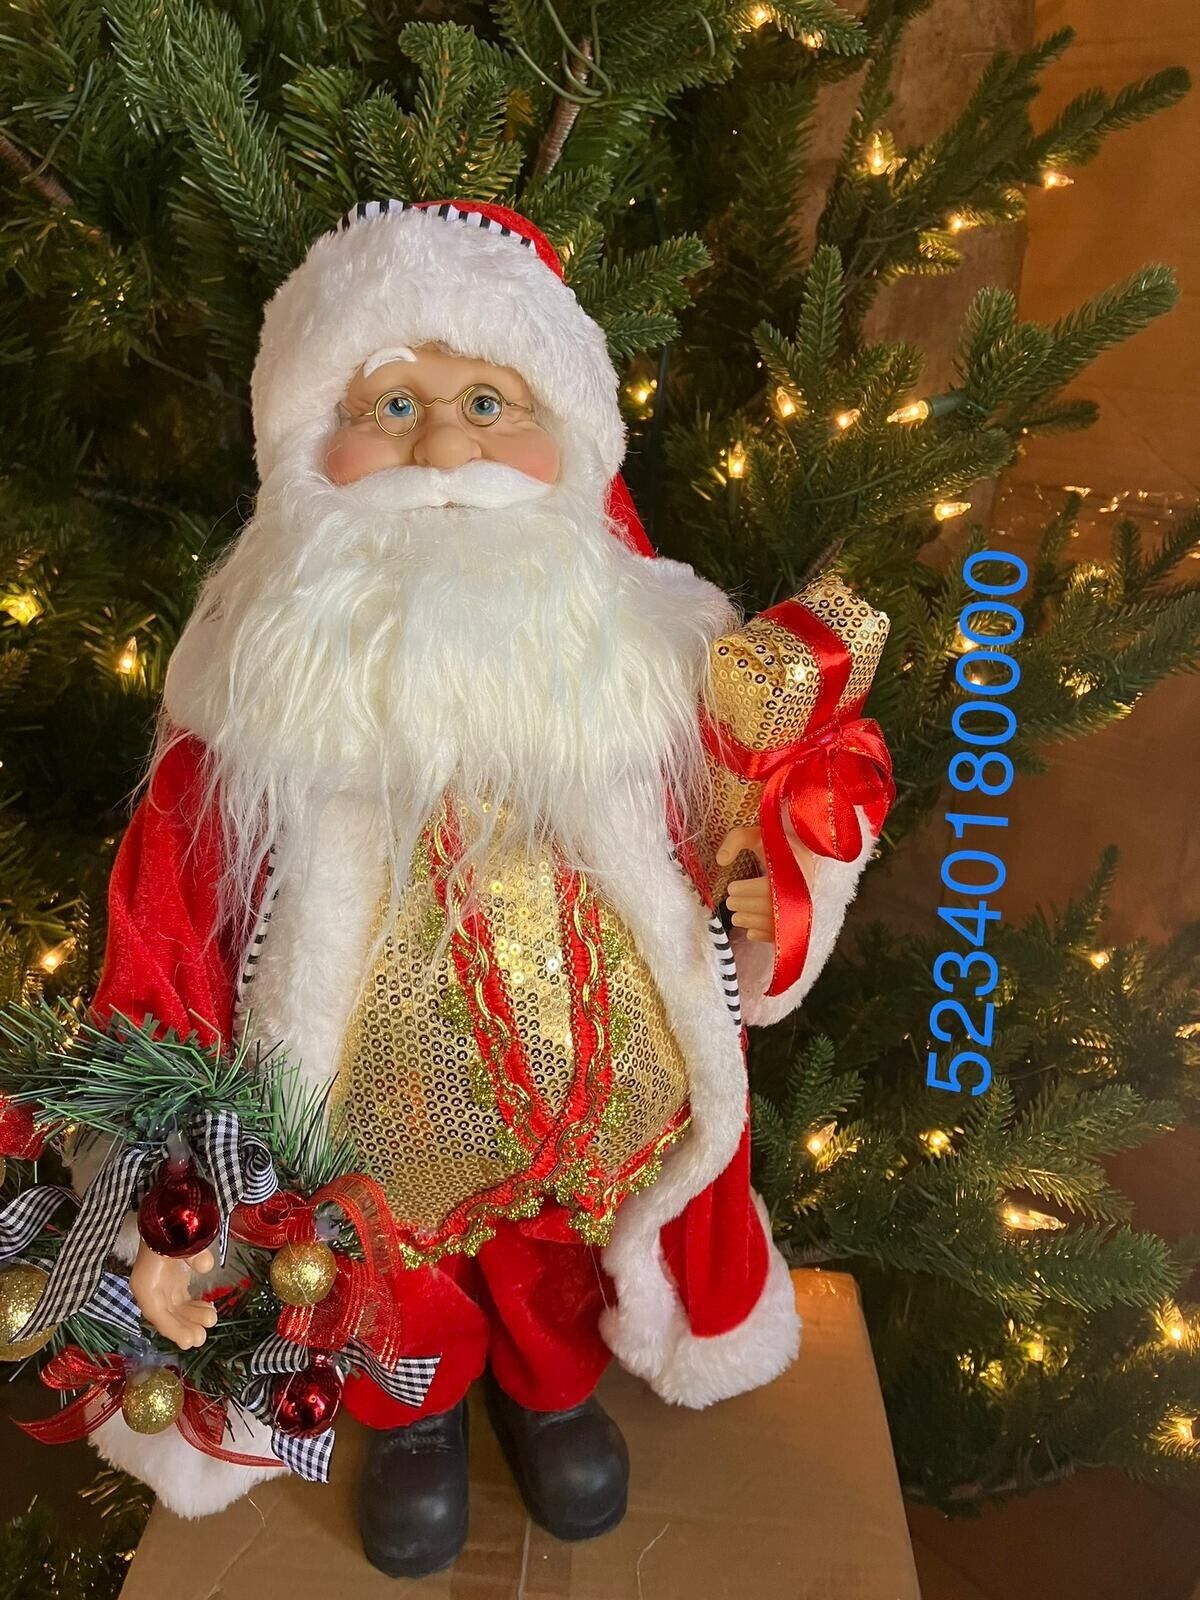 18IN RED COAT GOLD VEST STANDING SANTA FIGURINE WITH GIFTS HOLIDAY DECOR